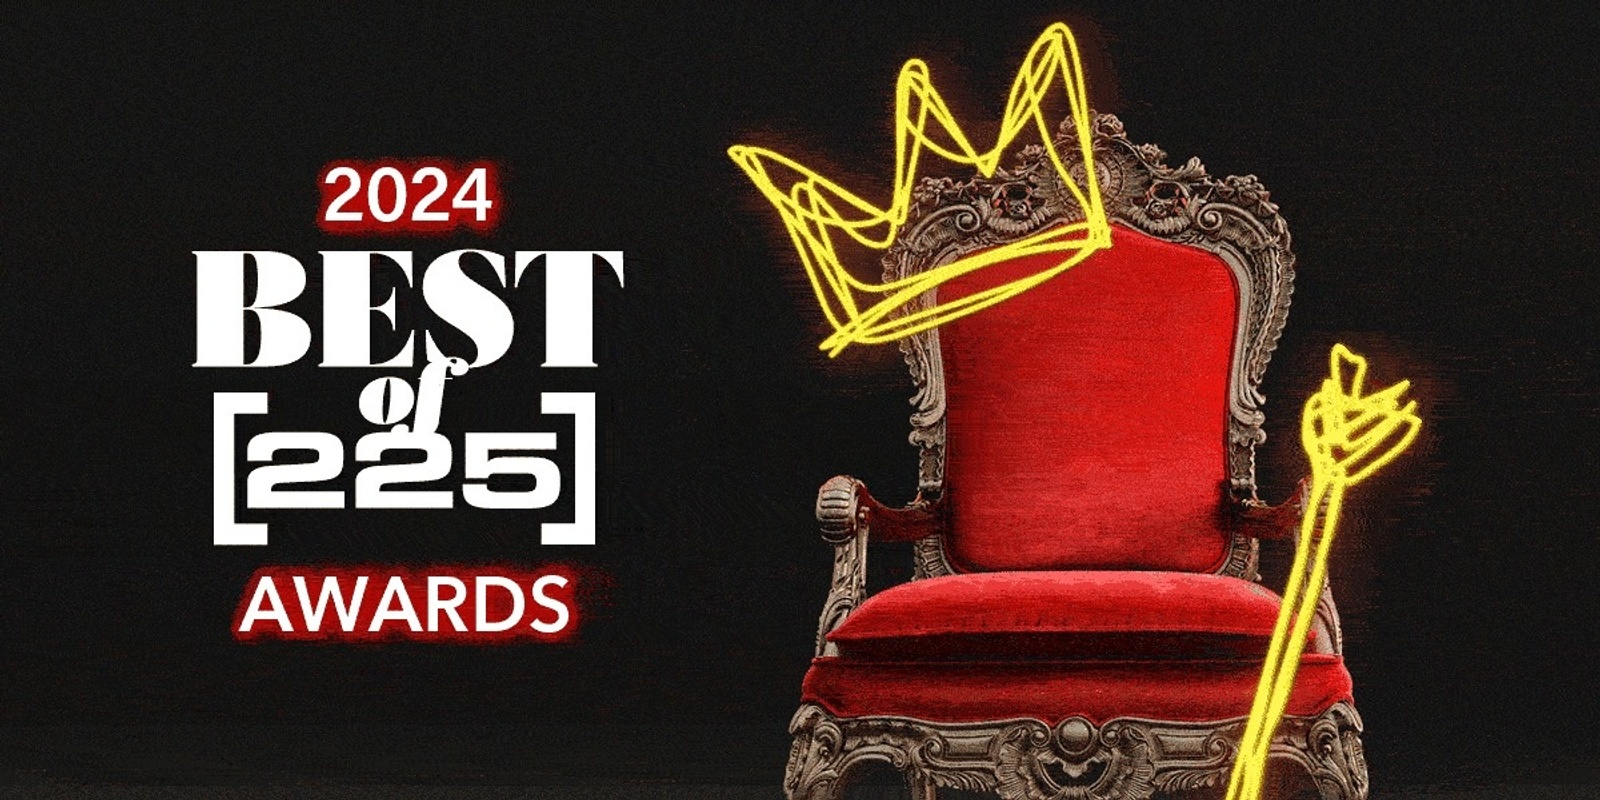 Banner image for 2024 Best of 225 Awards Party